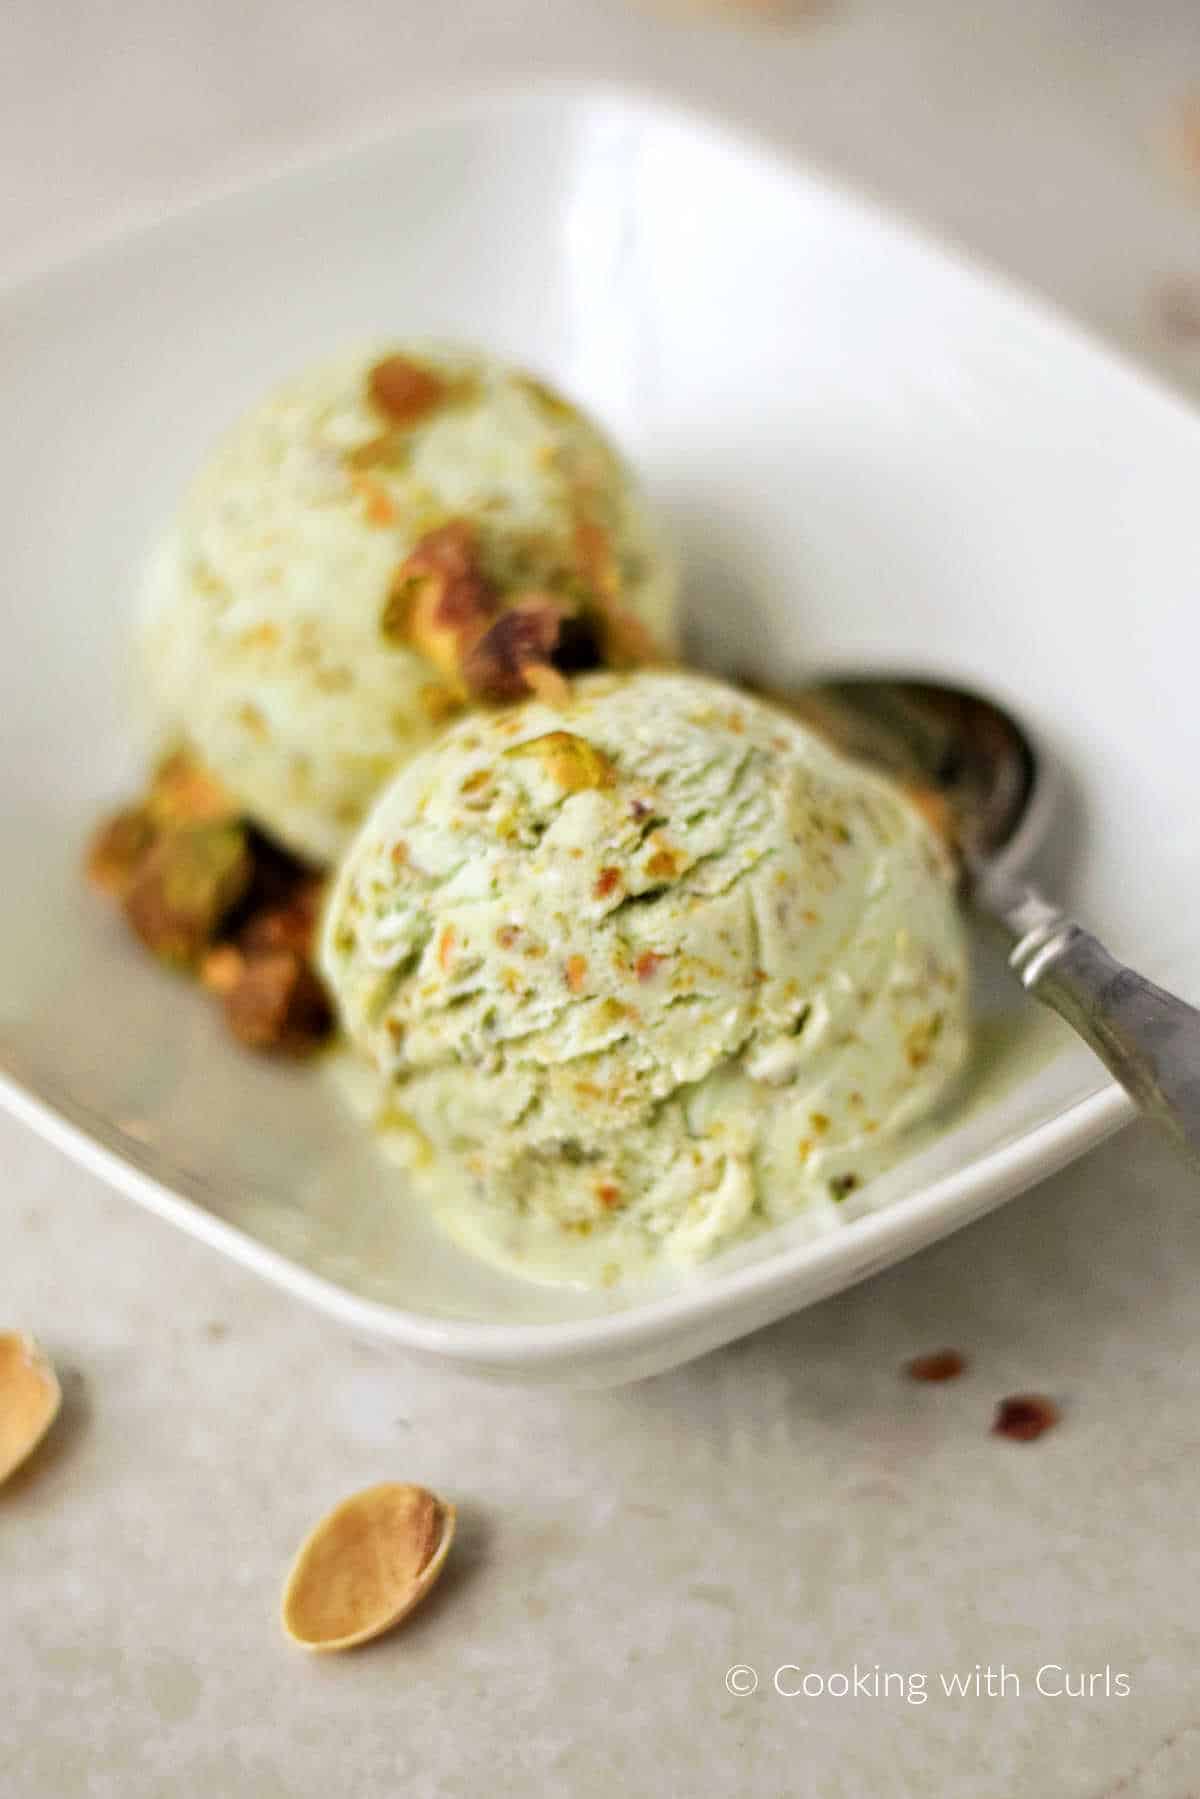 Two scoops of Pistachio Ice Cream with pistachio praline in a white bowl with a spoon on the side.